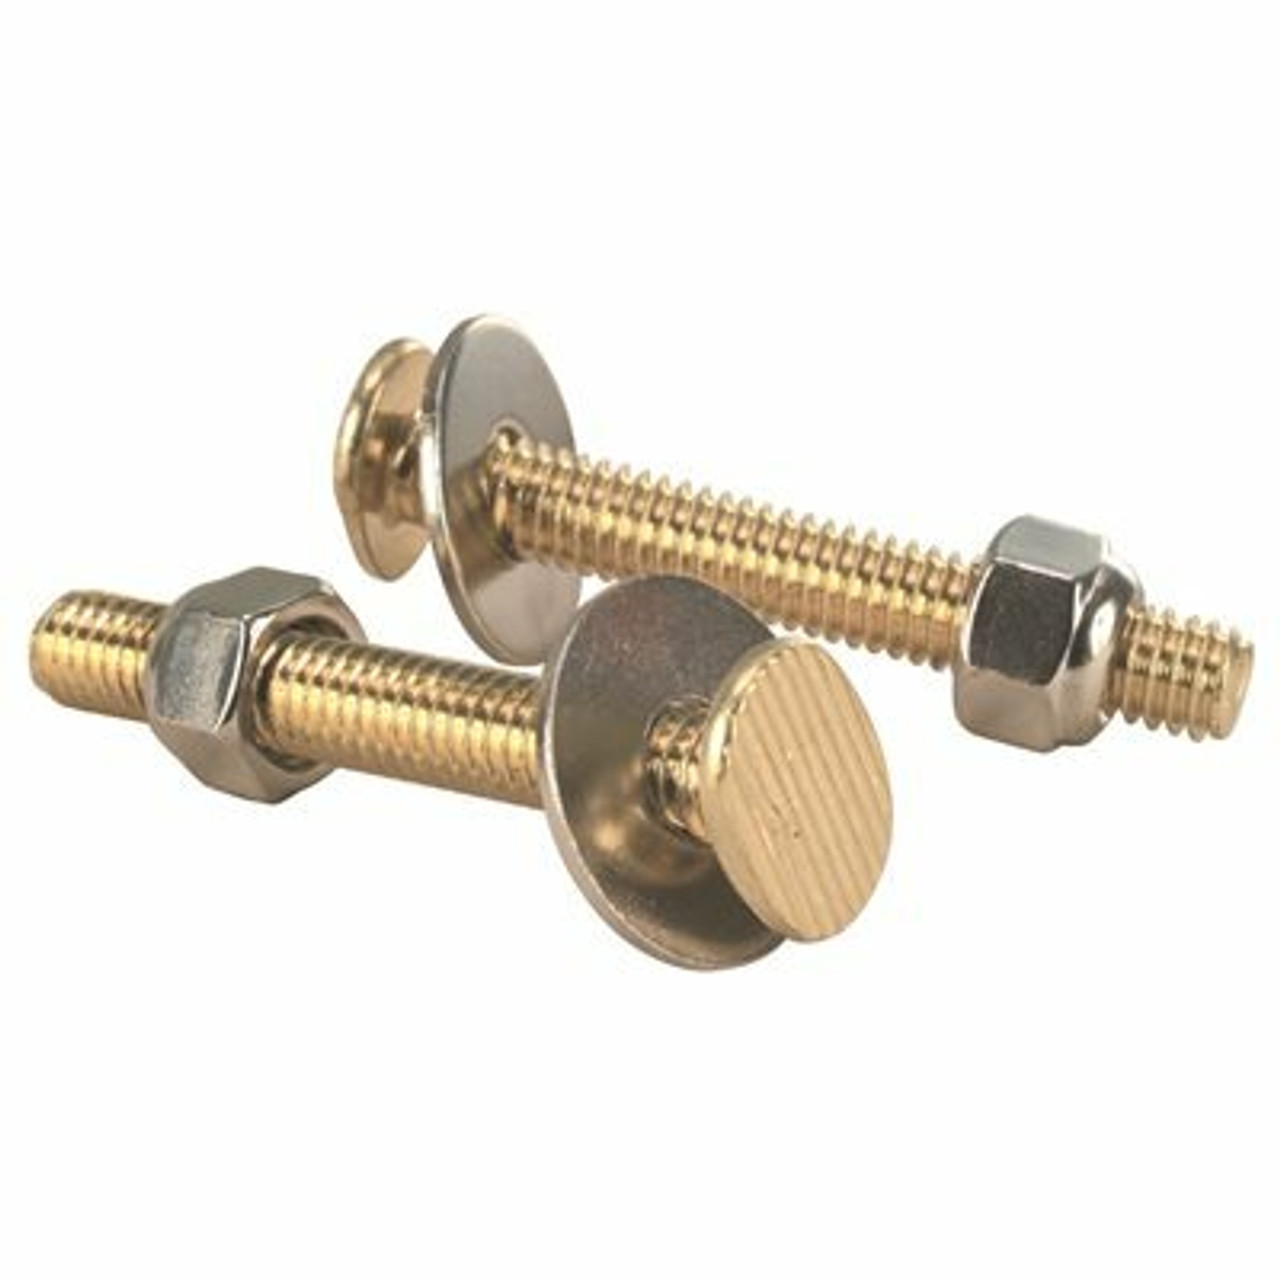 Proplus Oval Closet Bolt 5/16 In. X 2-1/4 In. Brass Plated